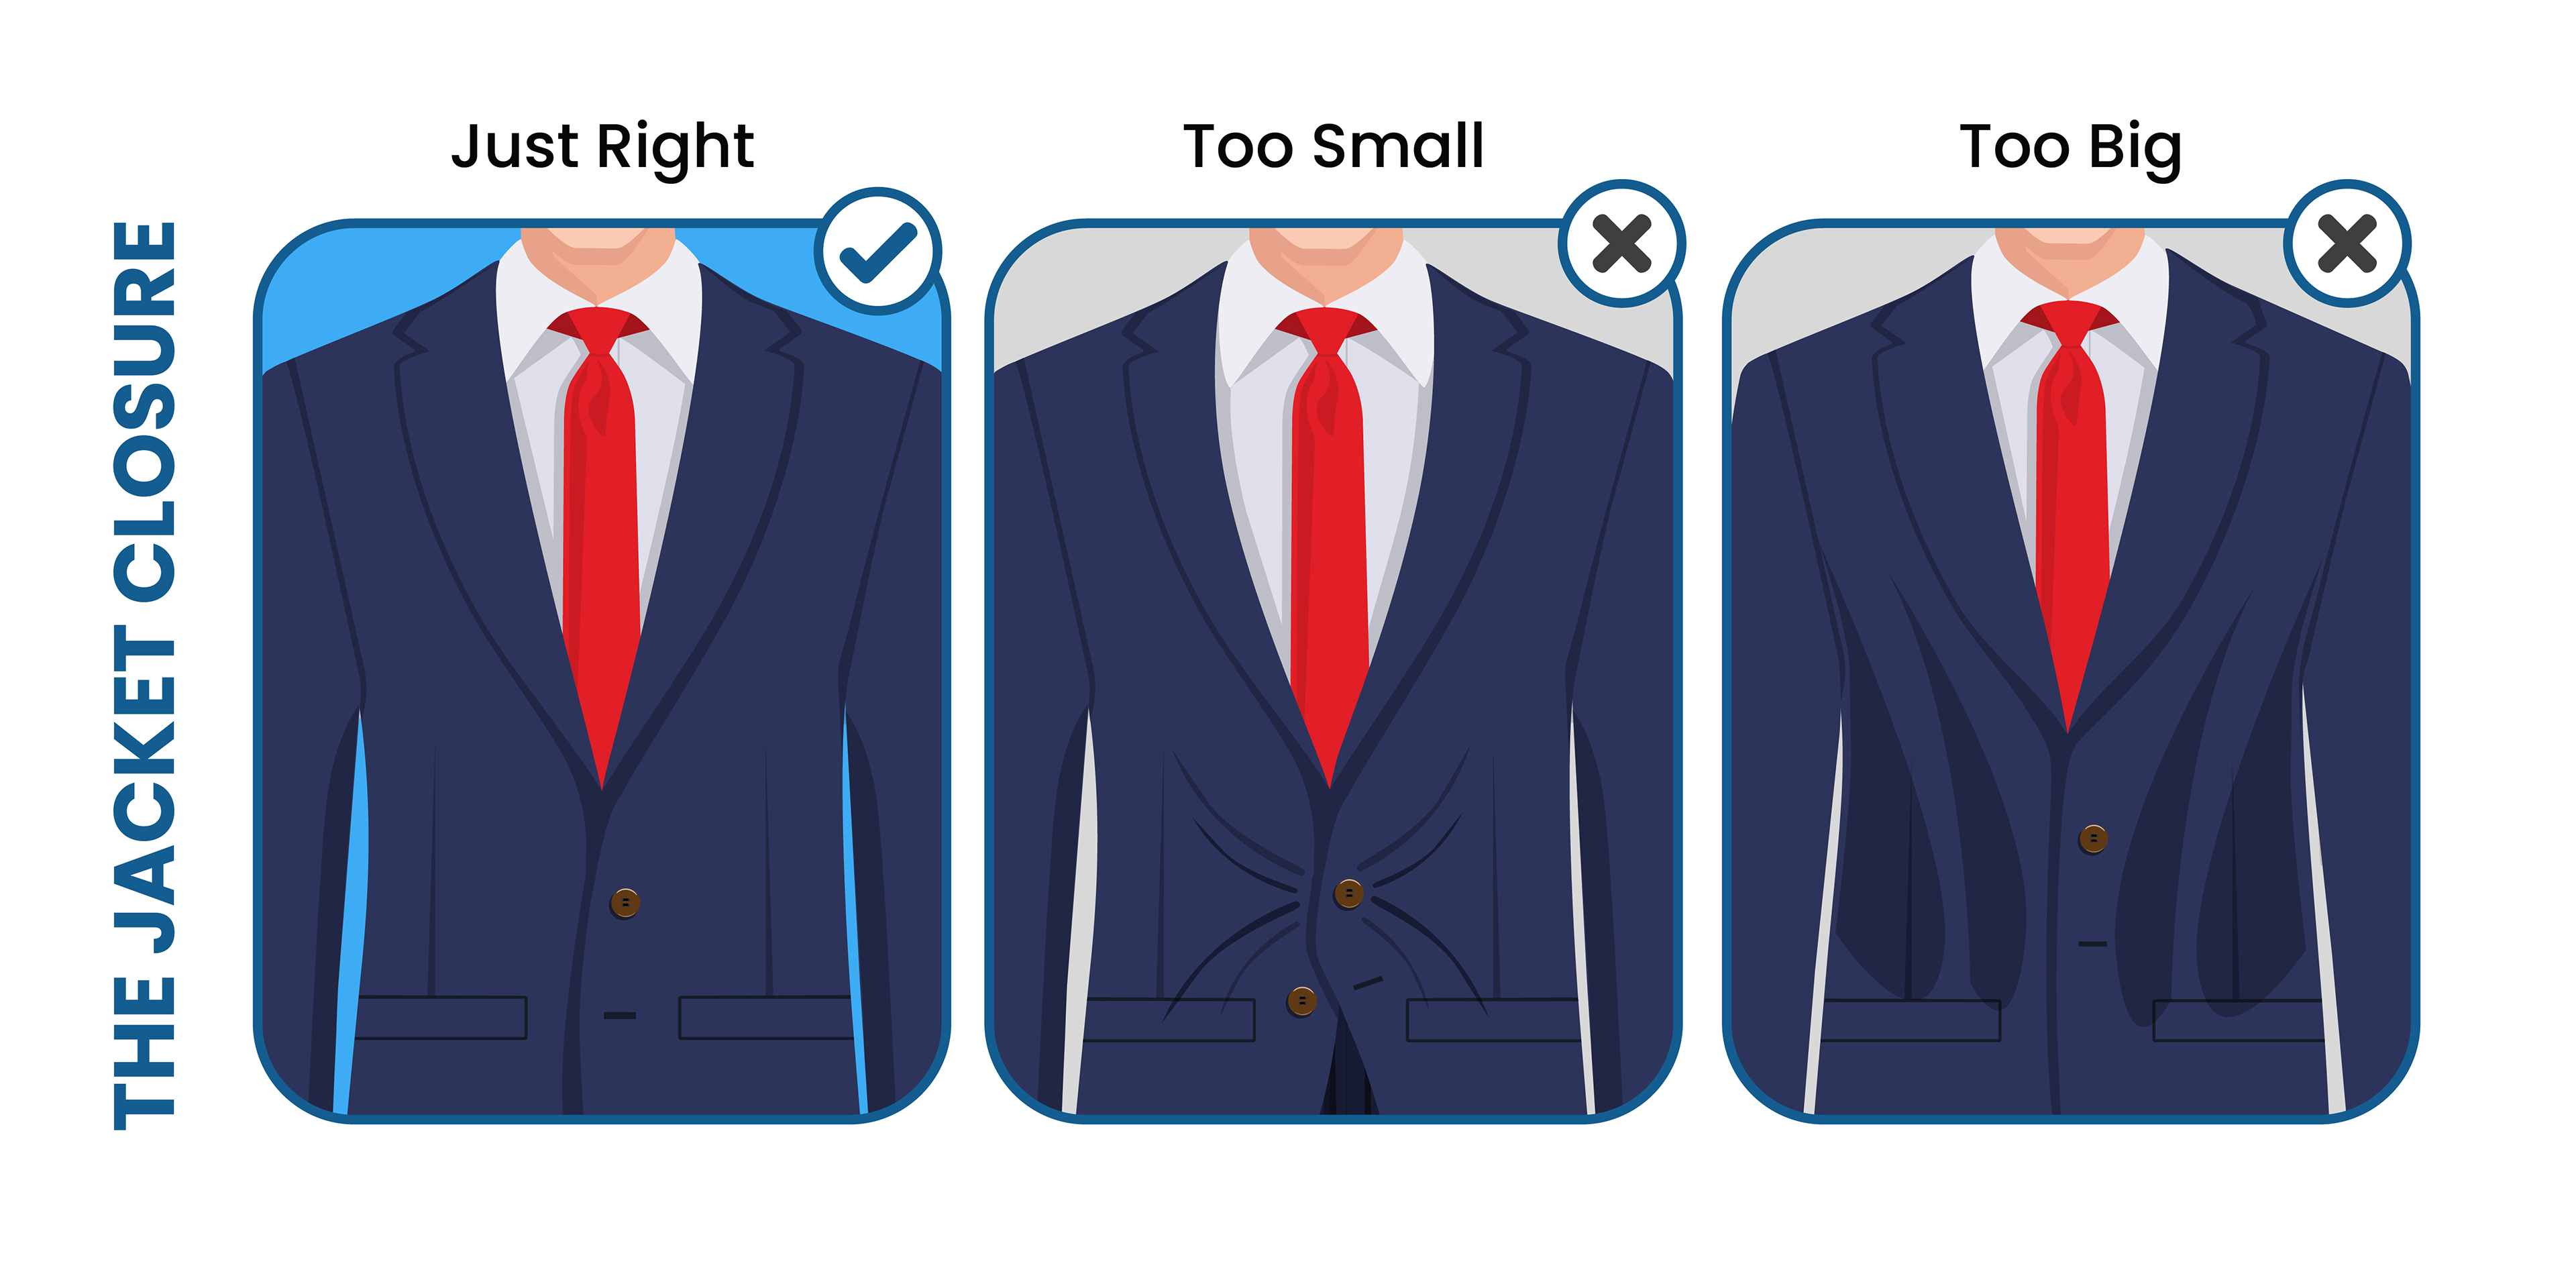 Men's Suits Guide: How to Choose the Perfect Suit - Suits Expert